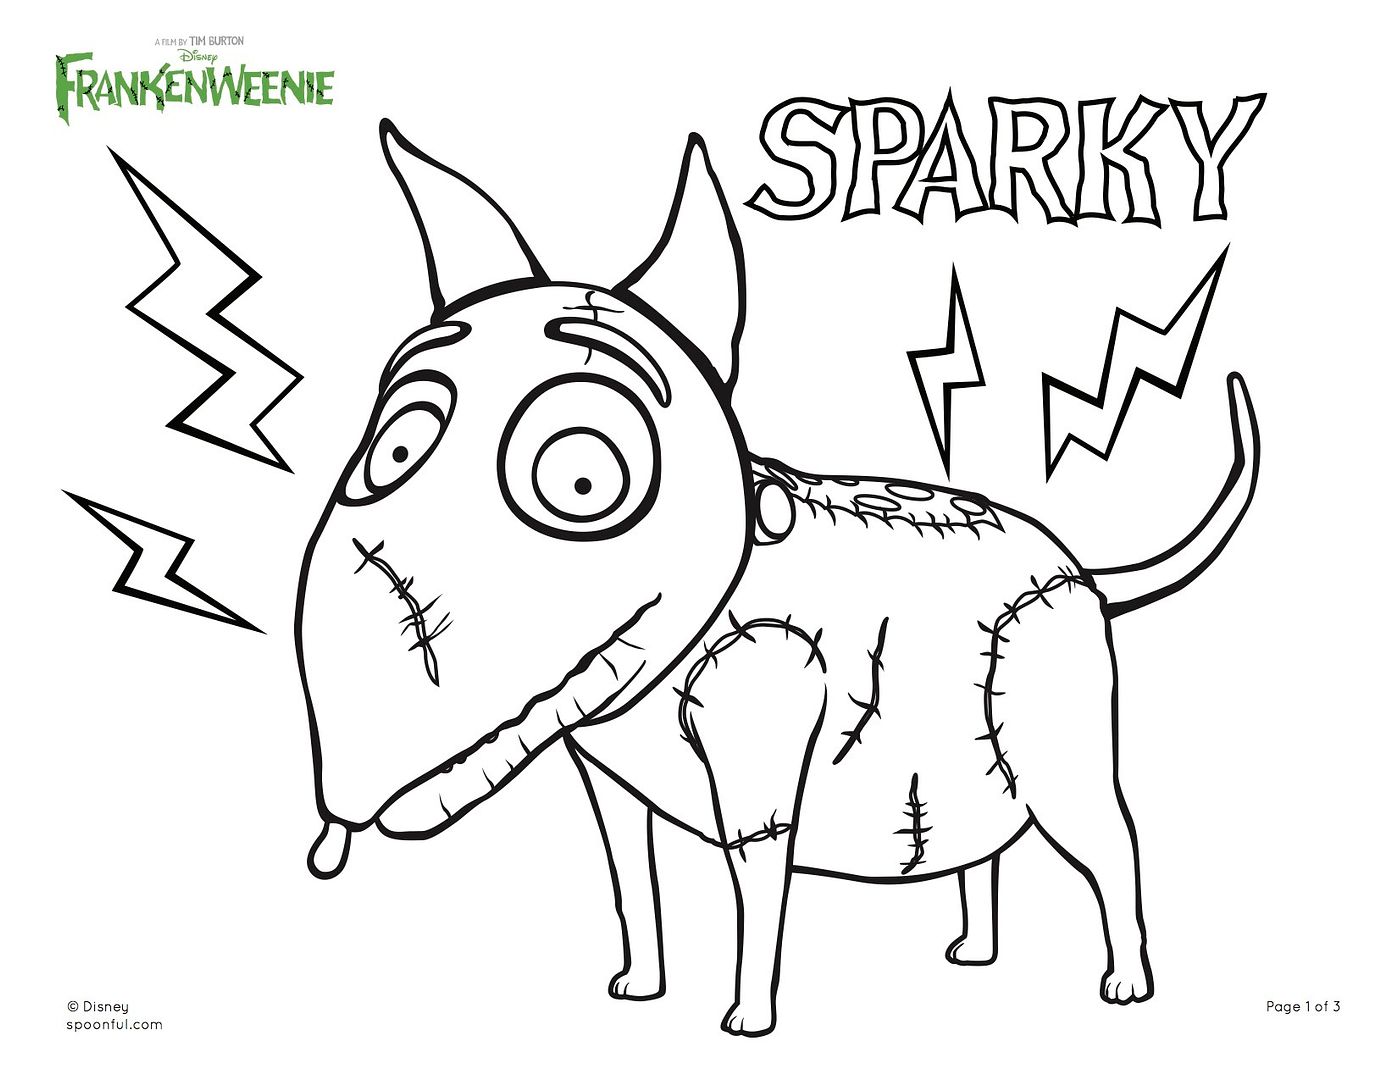 Free printable Frankenweenie coloring page for Halloween